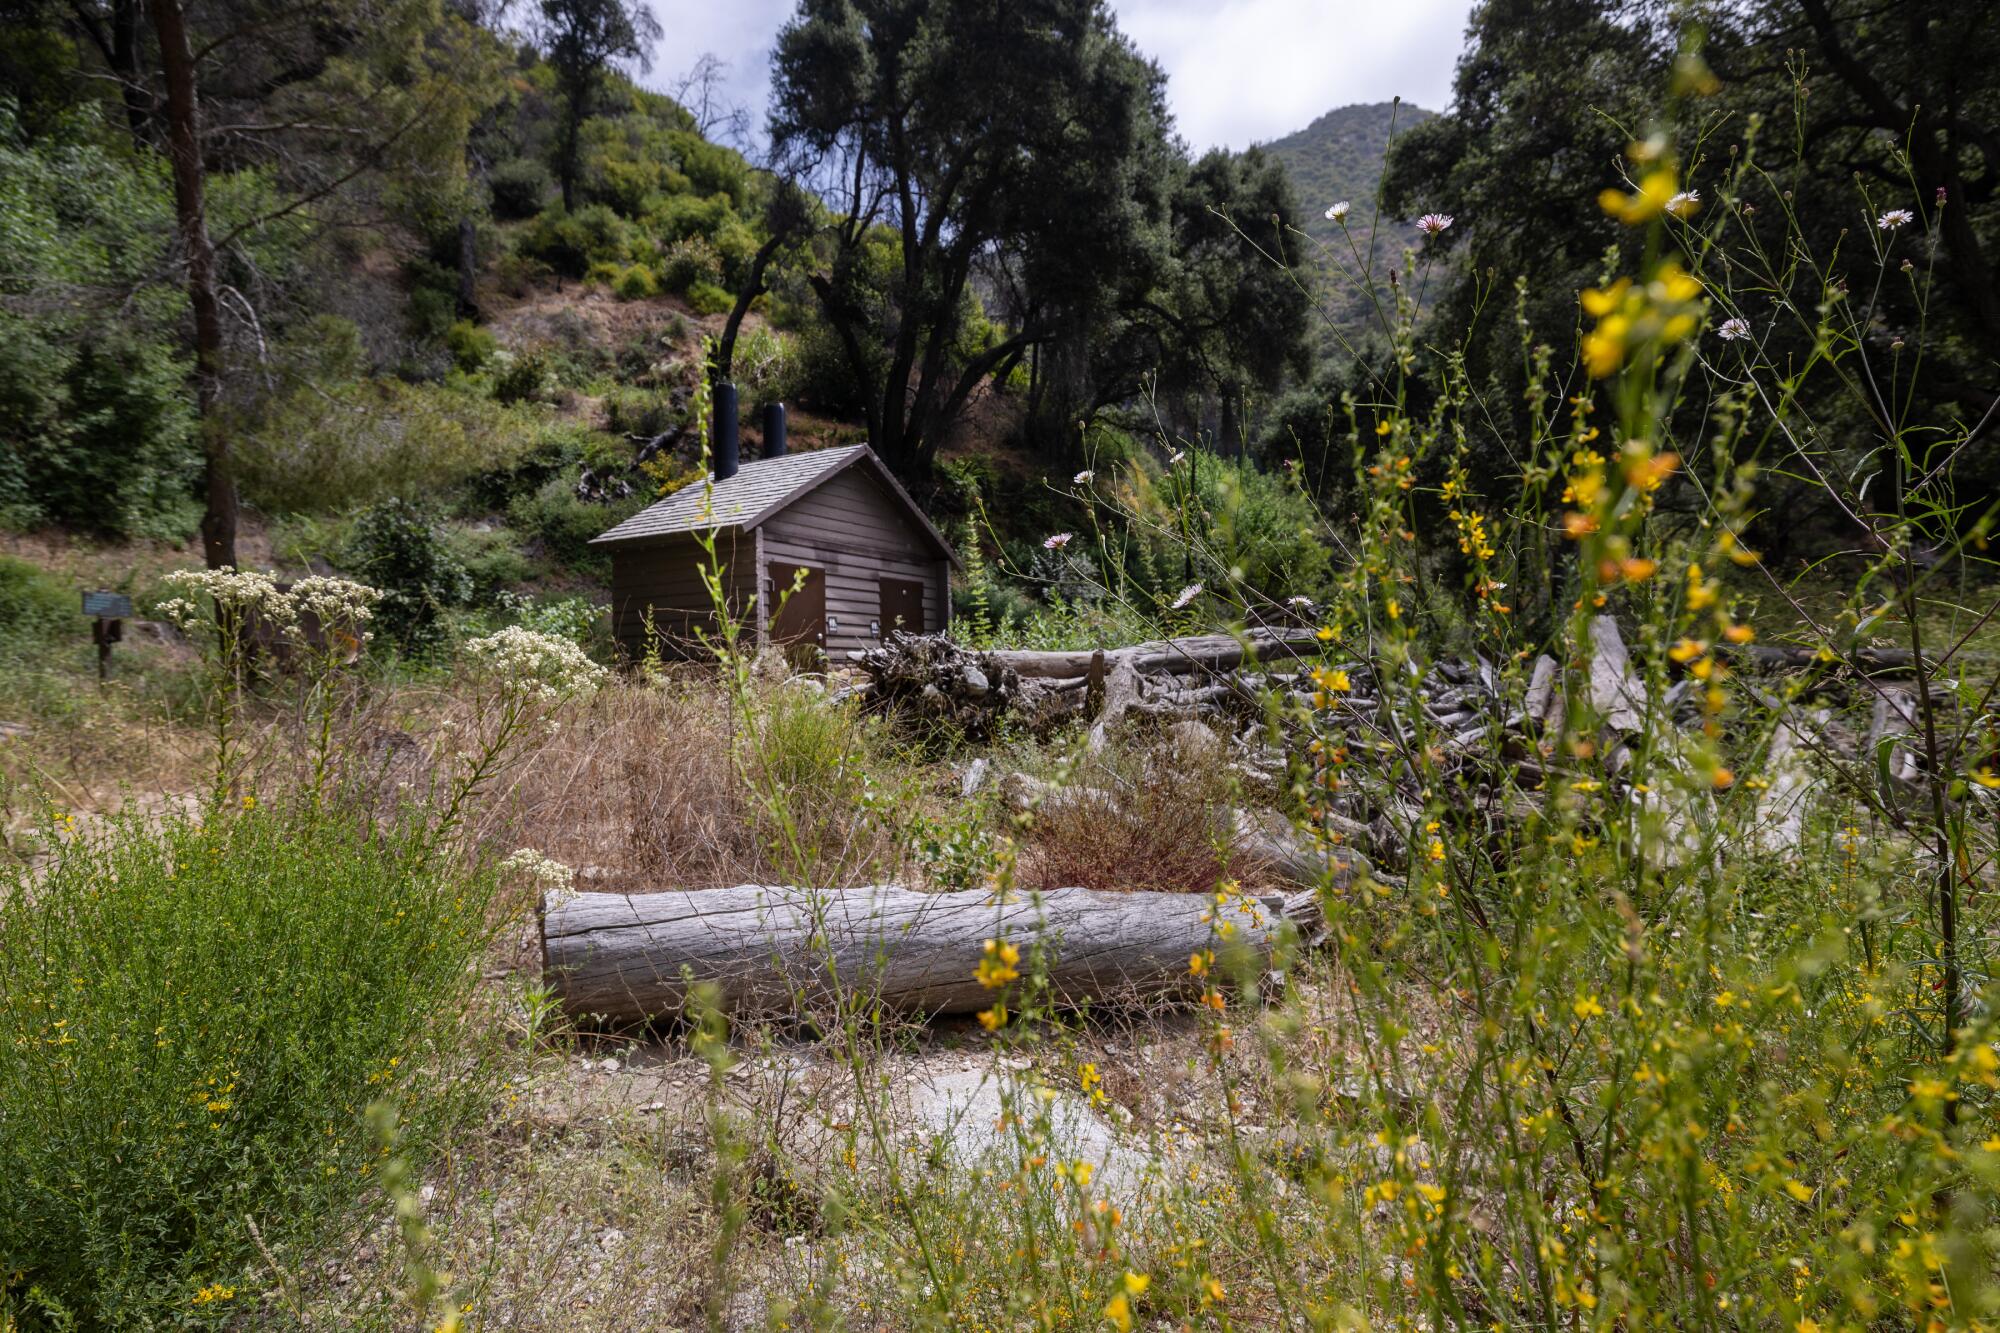  A building that housed restrooms is surrounded by vegetation and debris in Big Santa Anita Canyon.